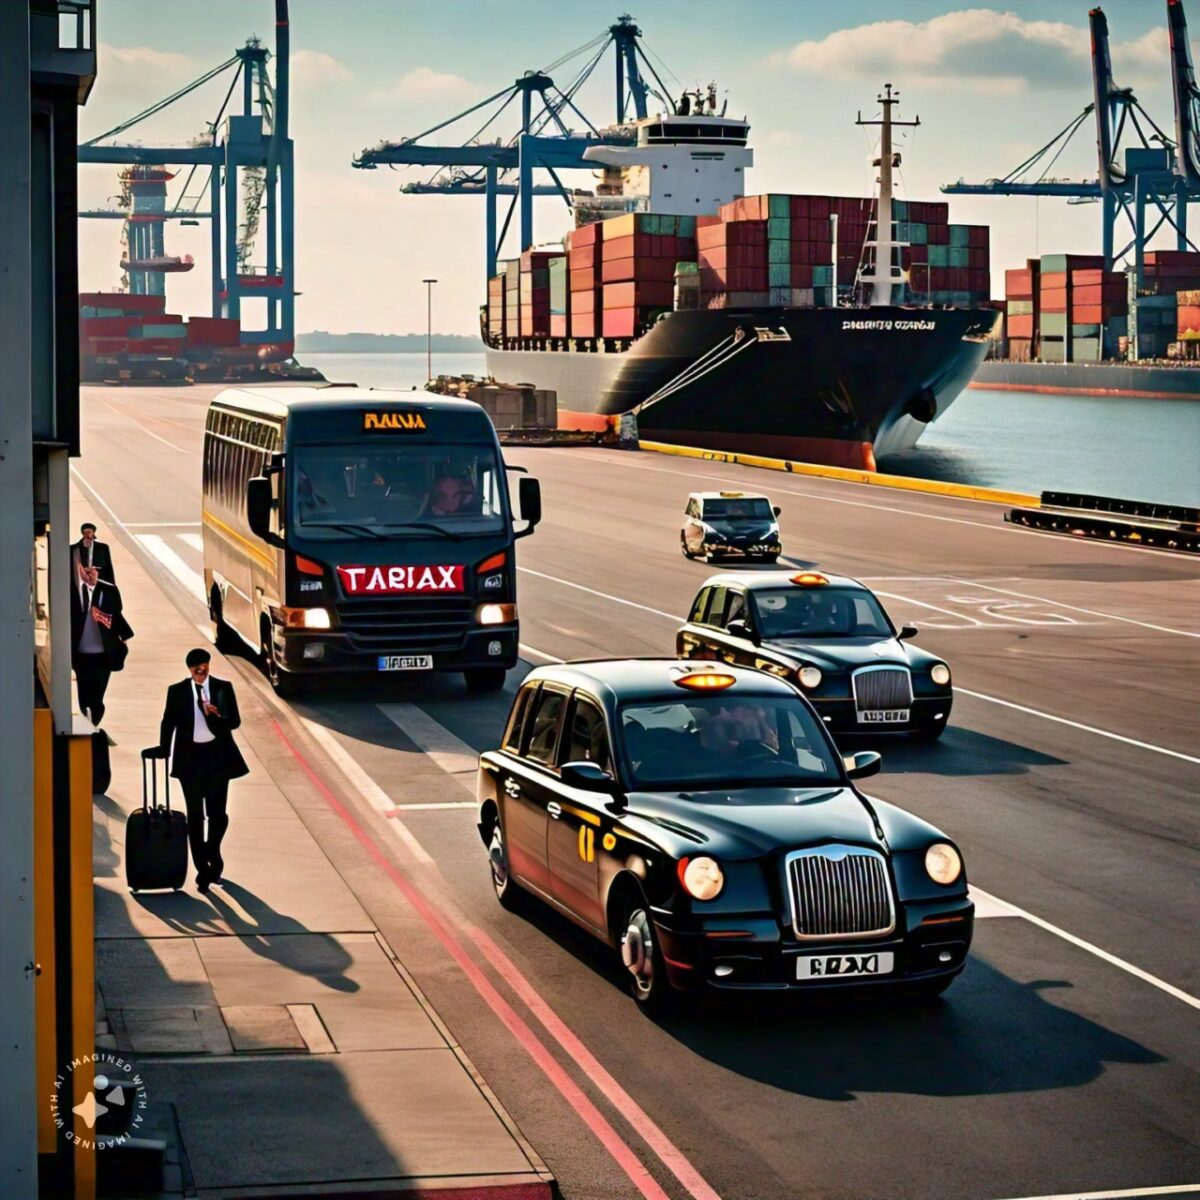 From Runway to Dock Efficient Taxi Transfers from Heathrow to Southampton Port